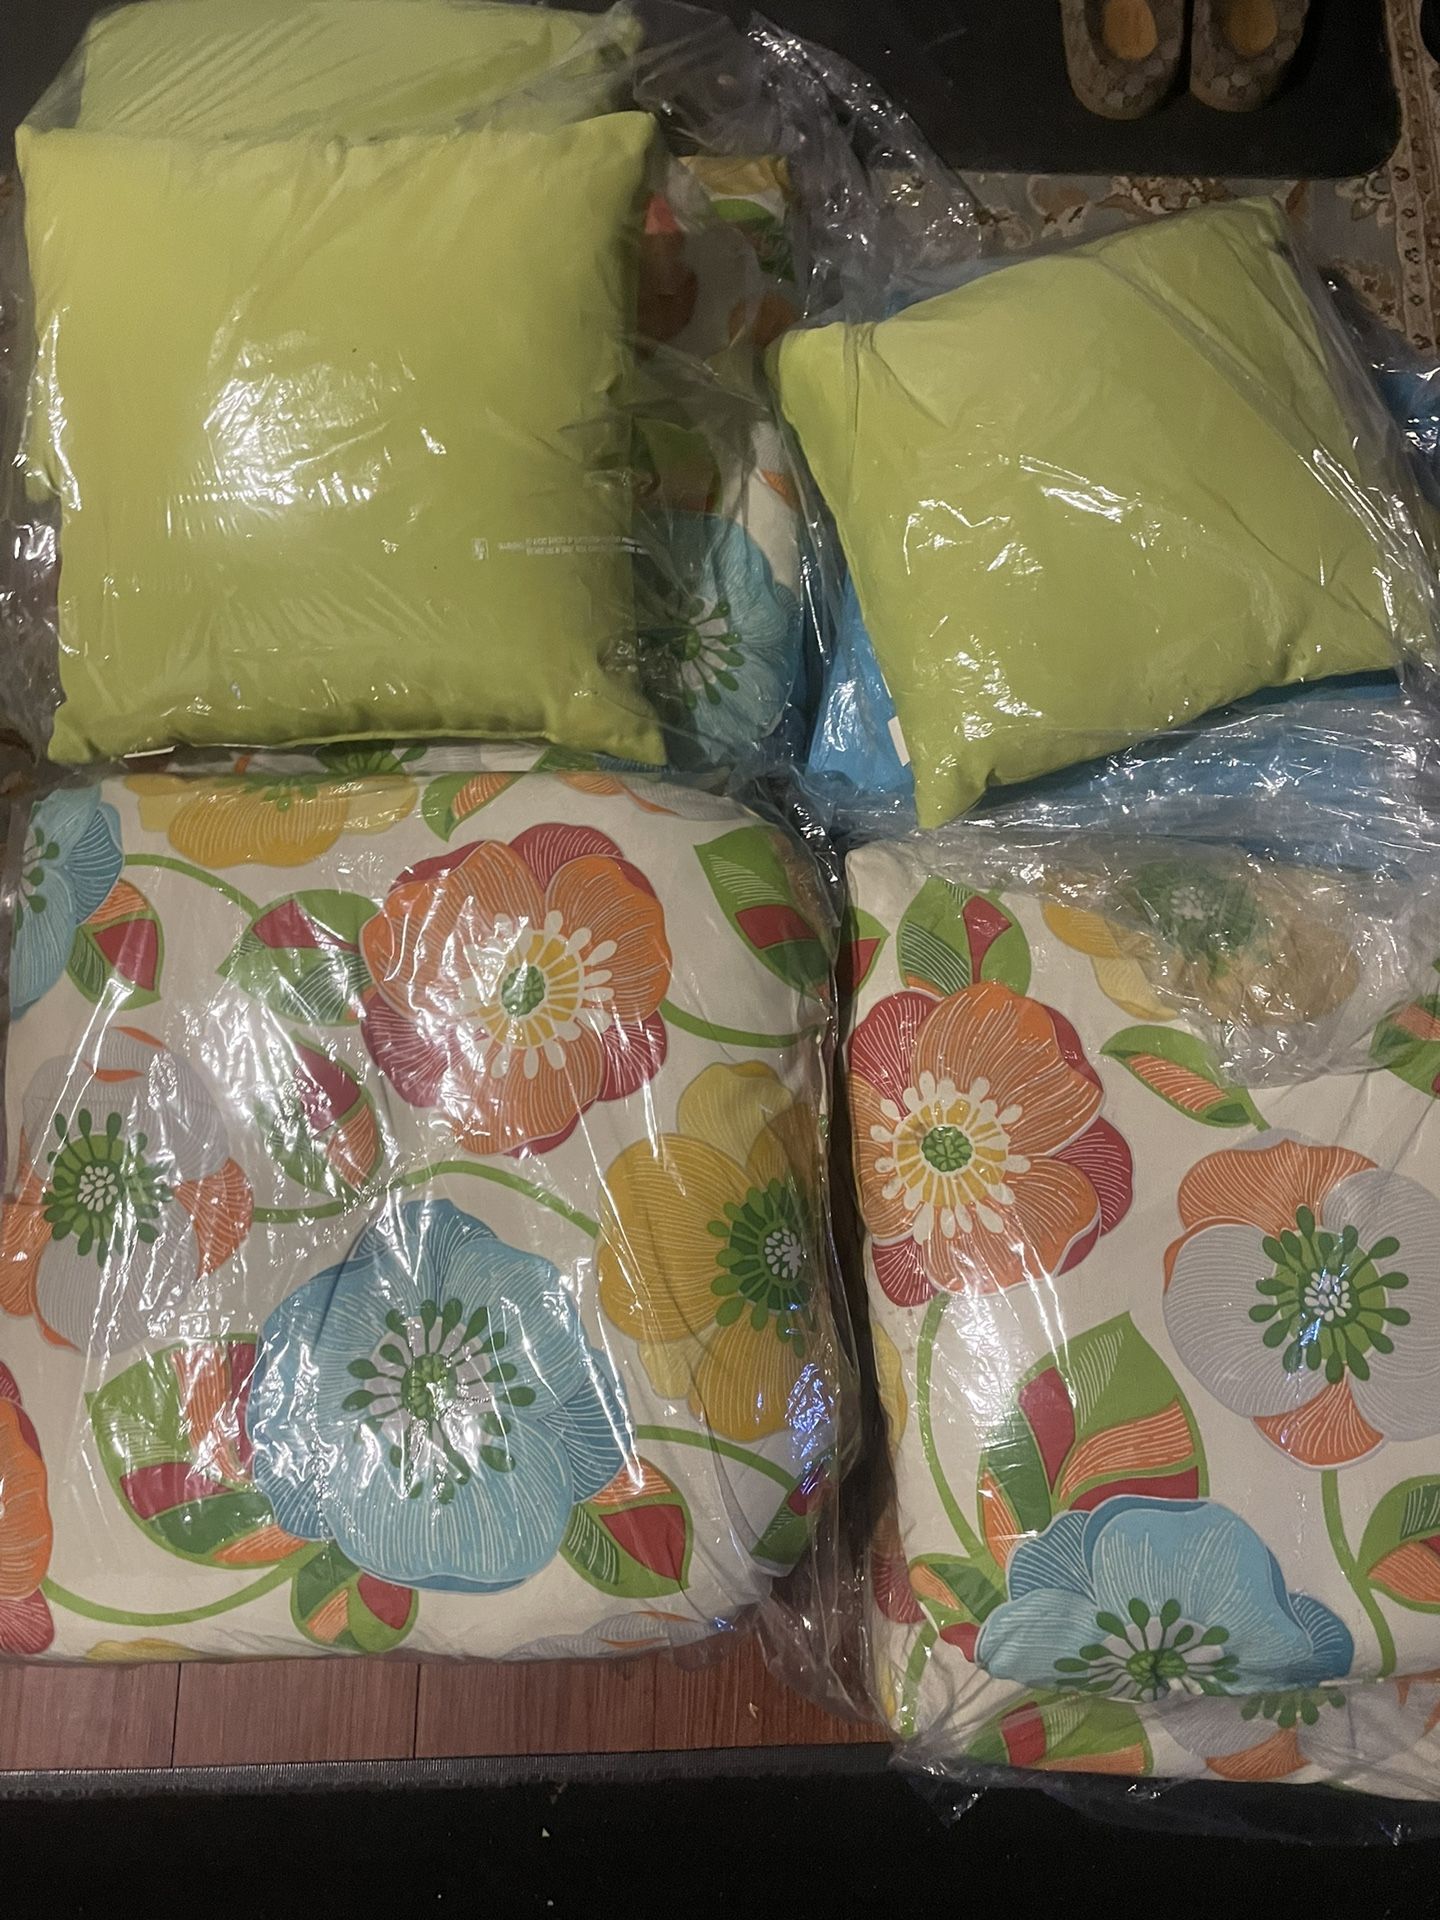 New pillows and cushions